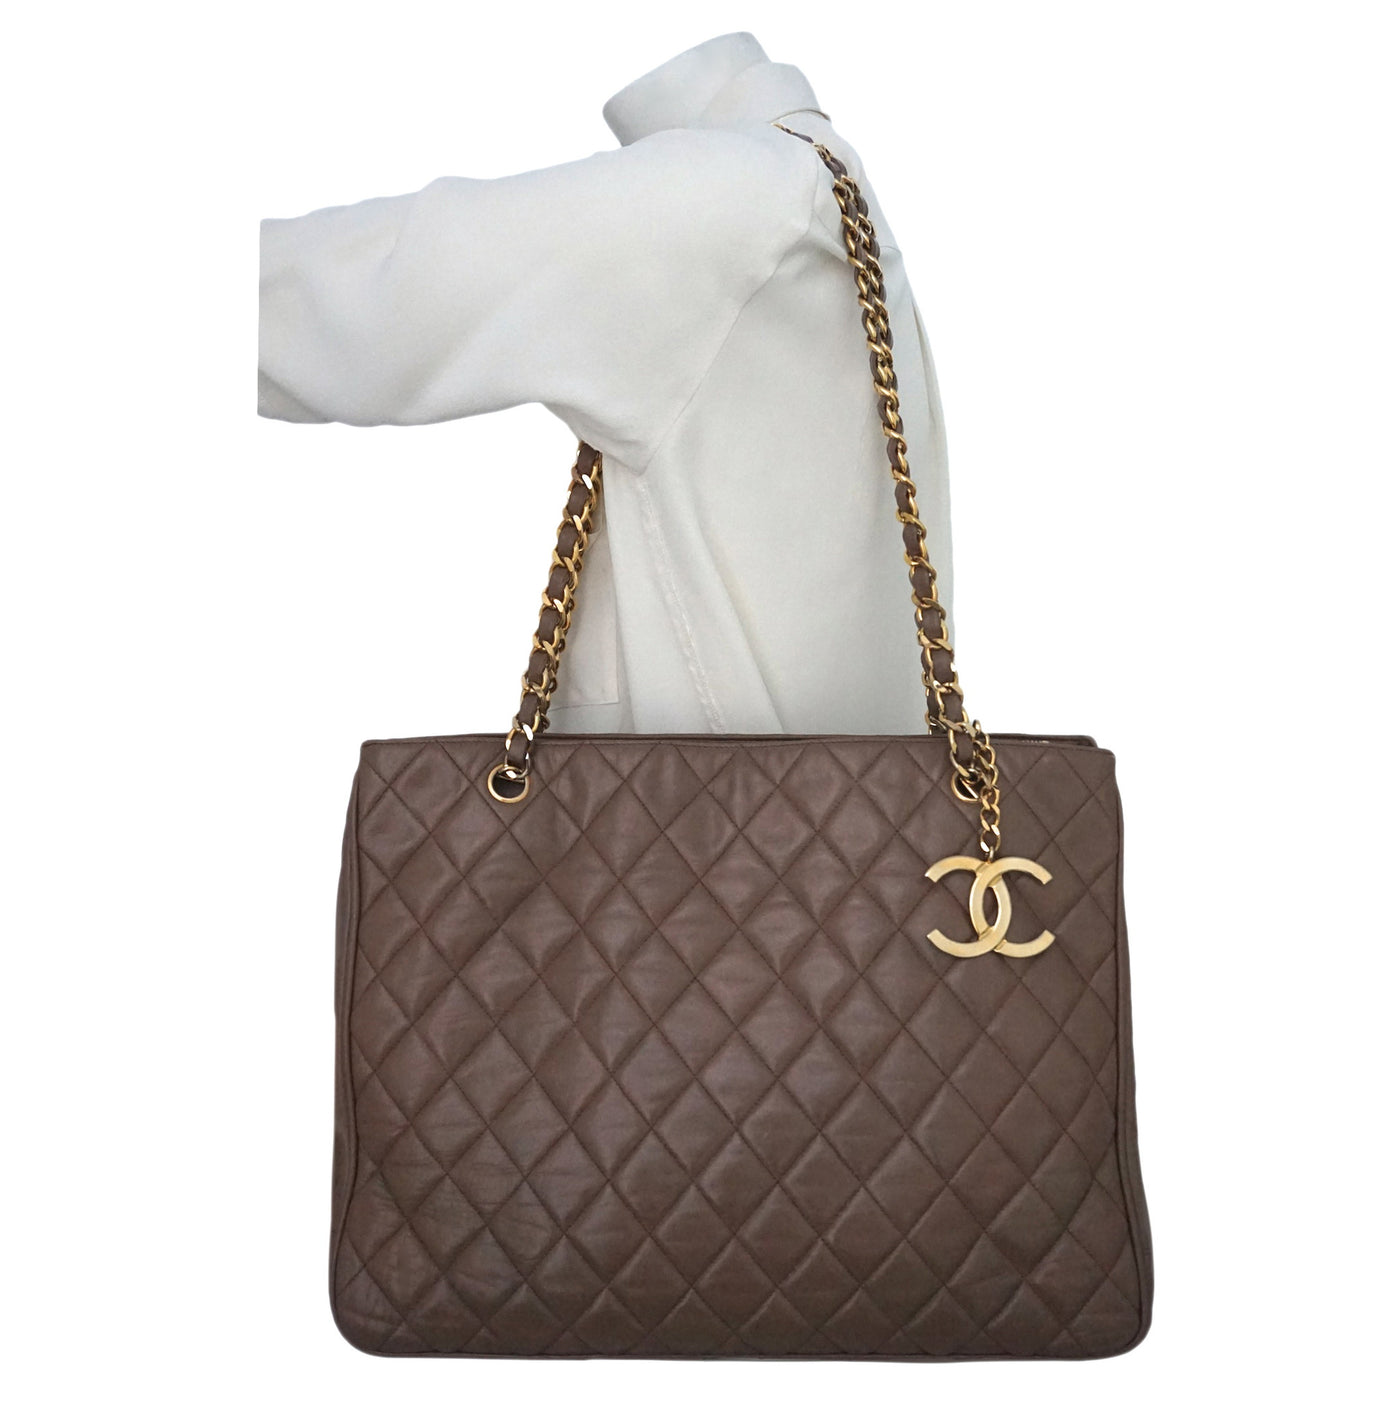 Authentic Chanel Vintage Taupe Quilted Jumbo Tote